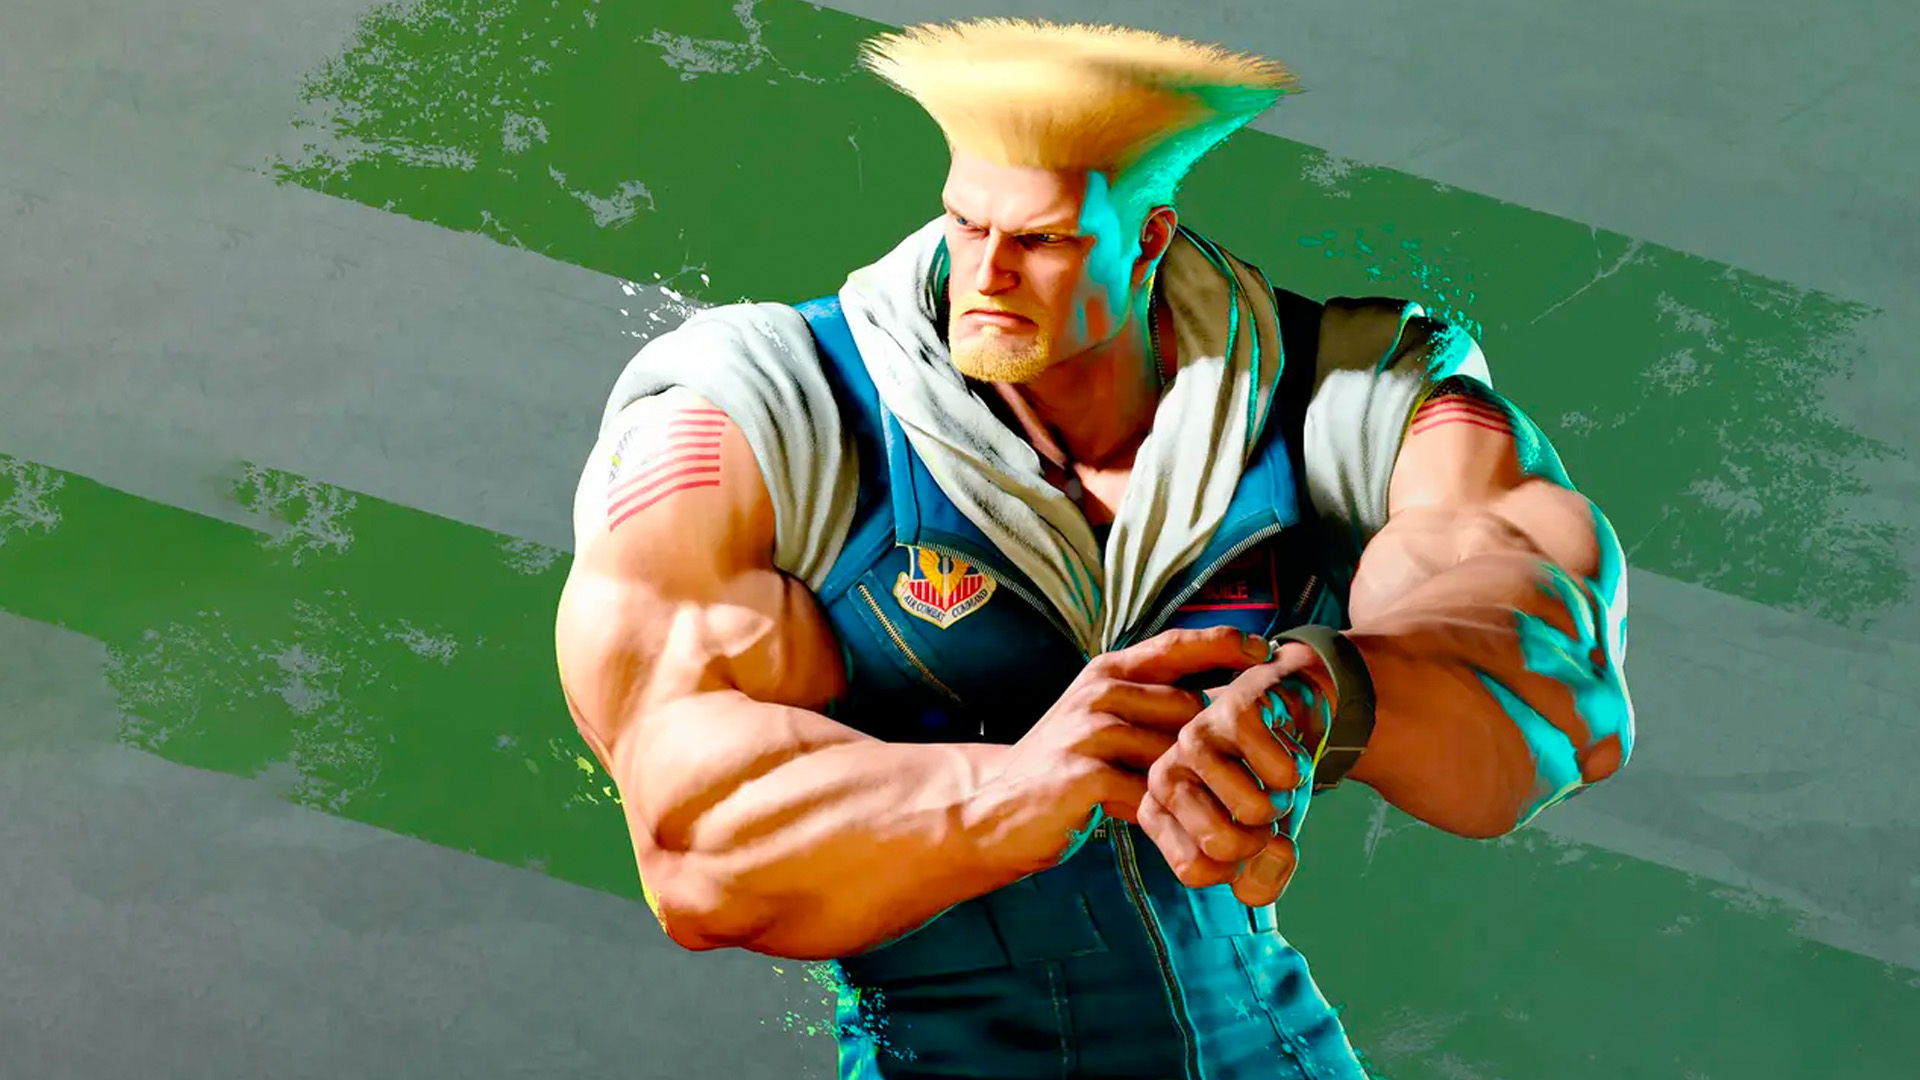 https://www.pcgamesn.com/wp-content/uploads/2022/06/street-fighter-6-roster-characters-list-guile.jpg